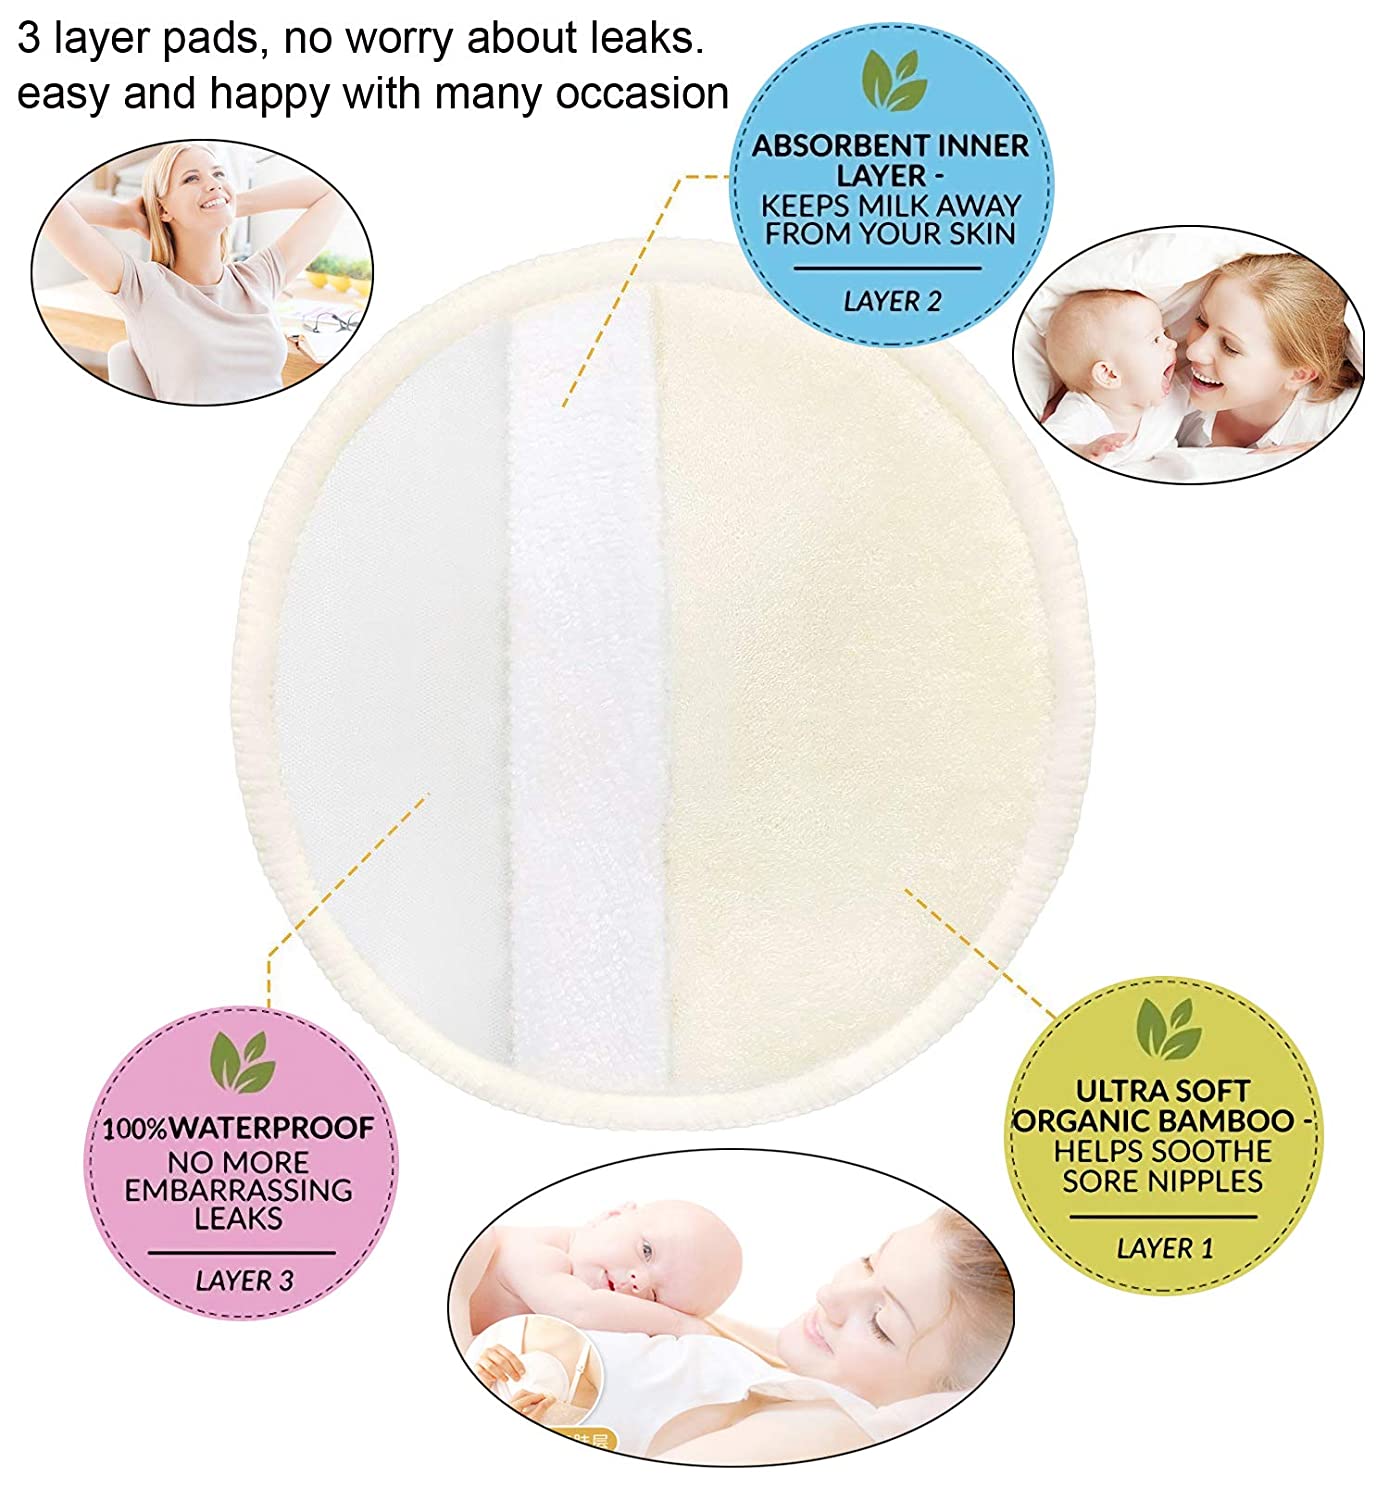 Organic Bamboo Breast Pads for Maternity – KeaBabies